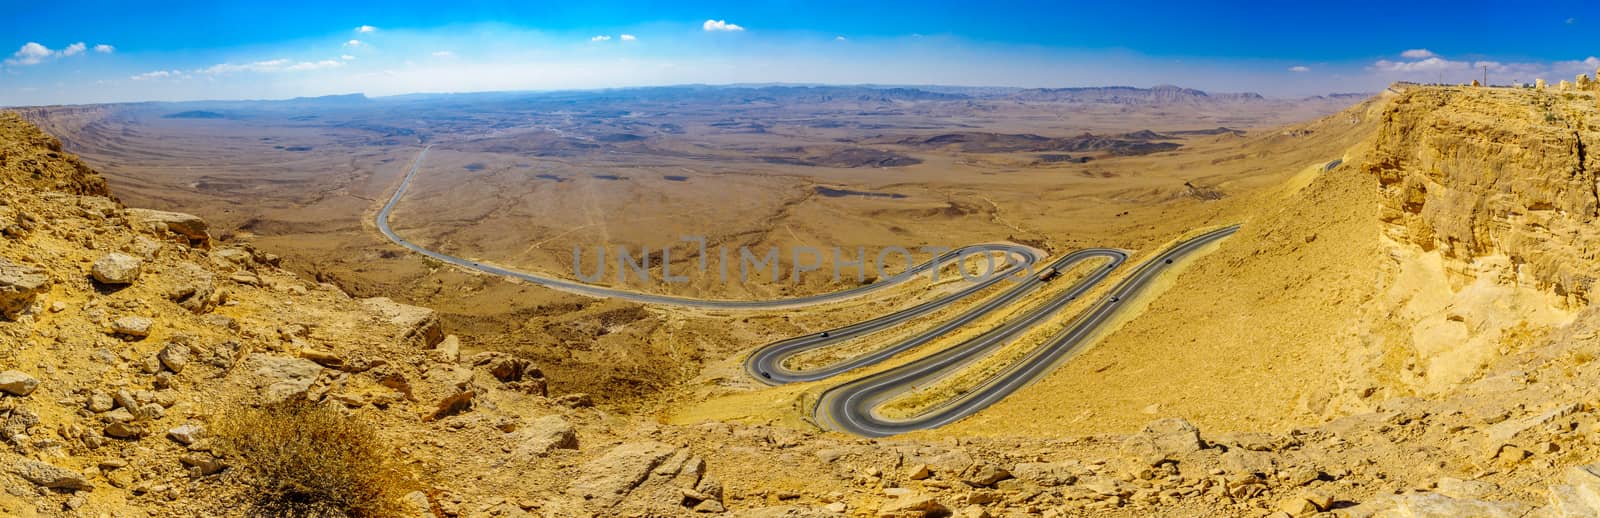 Panoramic view of cliffs, landscape, and hairpinned road in Makhtesh (crater) Ramon, the Negev Desert, Southern Israel